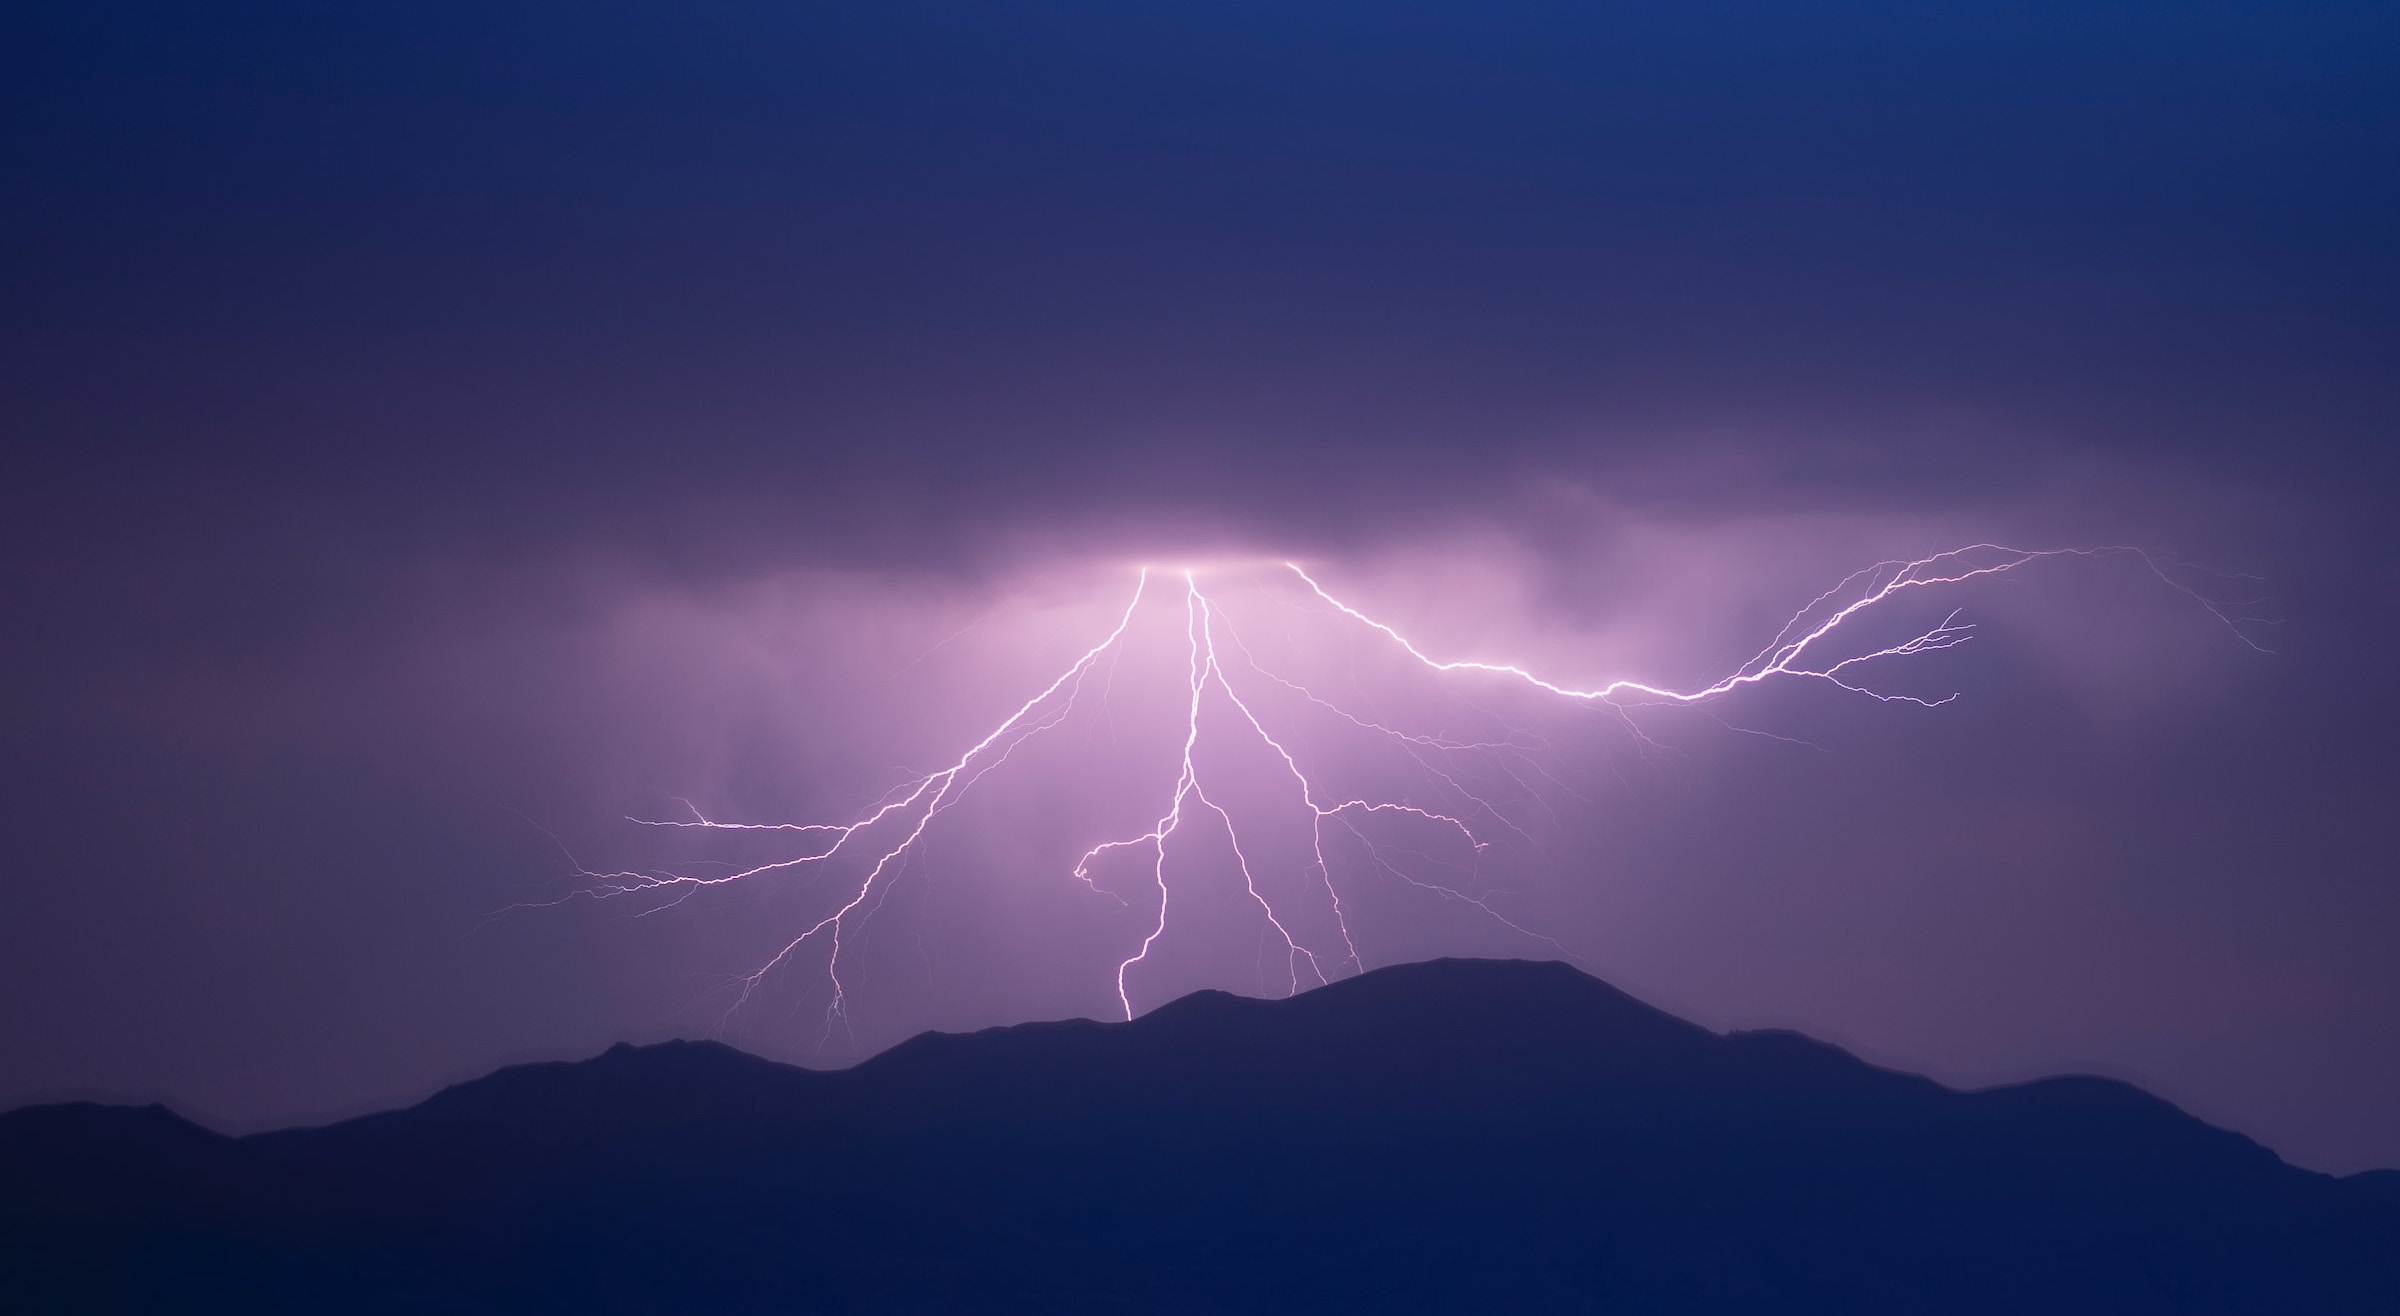 Image showing lightning strikes over mountains